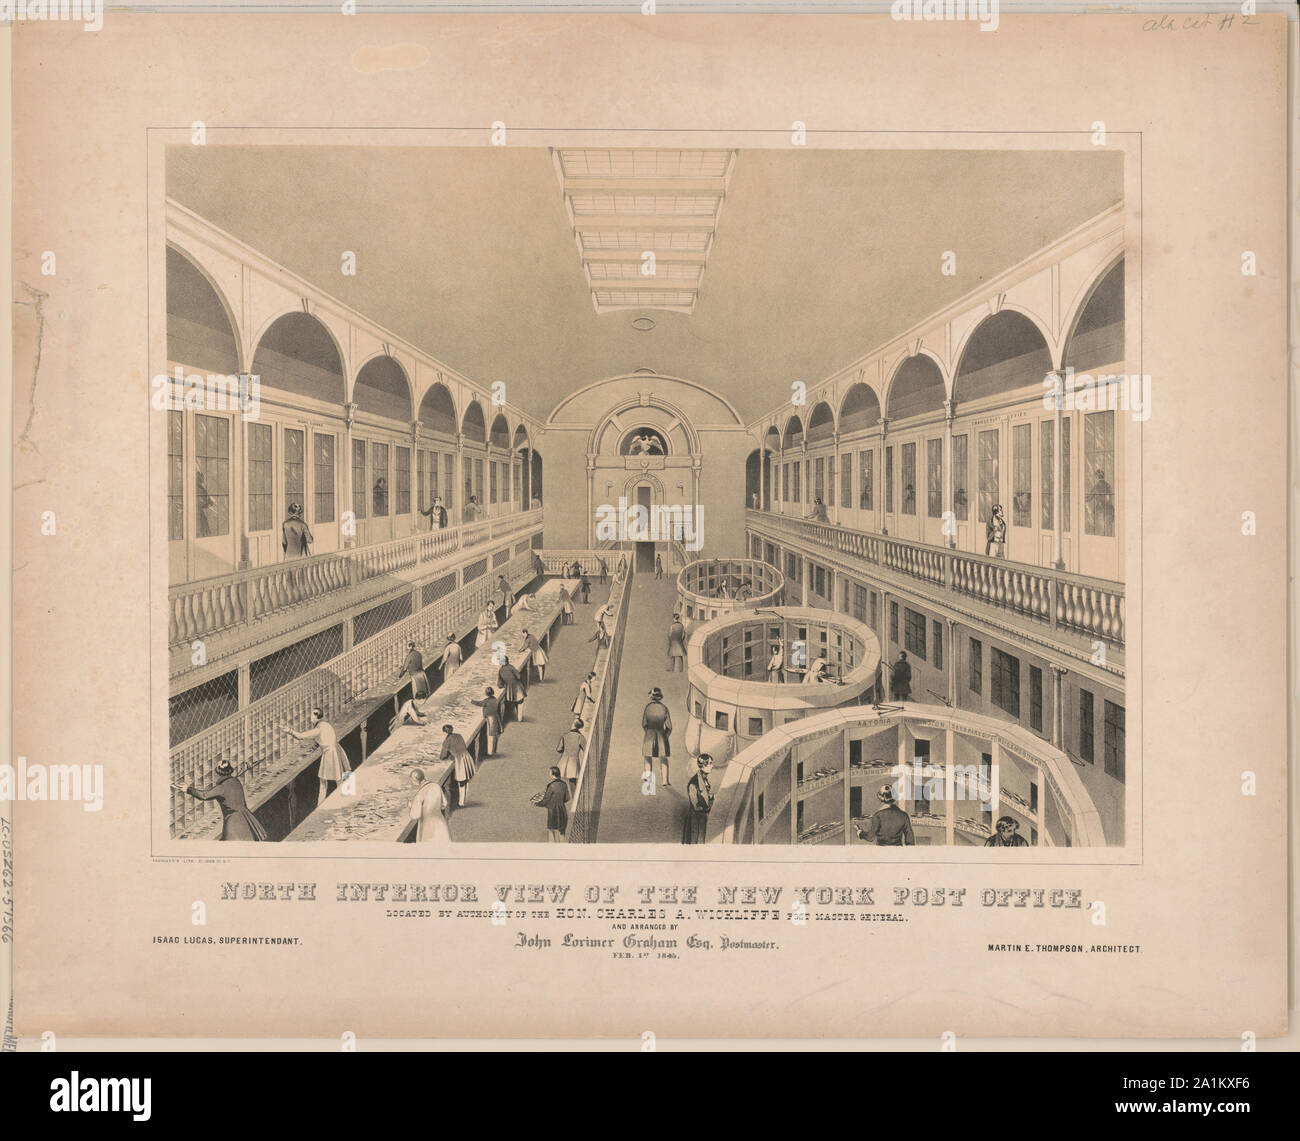 North interior view of the New York post office, located by authority of the Hon. Charles A. Wickliffe Post Master General and arranged by John Lorimer Graham Esq. Postmaster, Feb. 1st 1845 Stock Photo